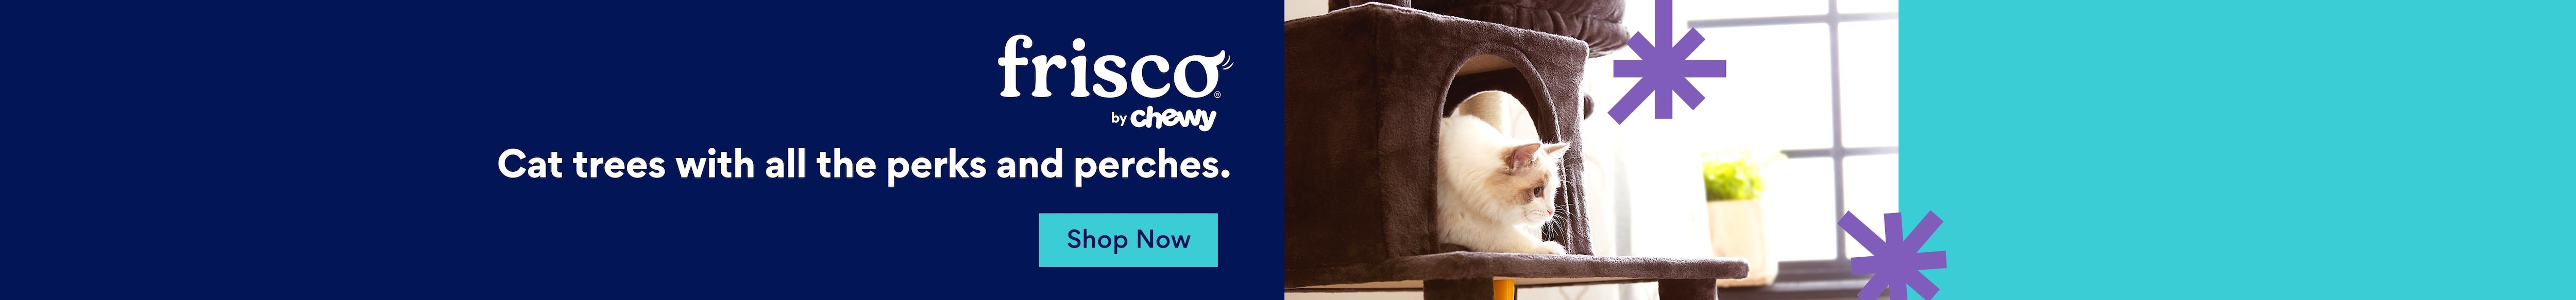 Frisco by Chewy. Cat trees with all the perks and perches. Shop Now.